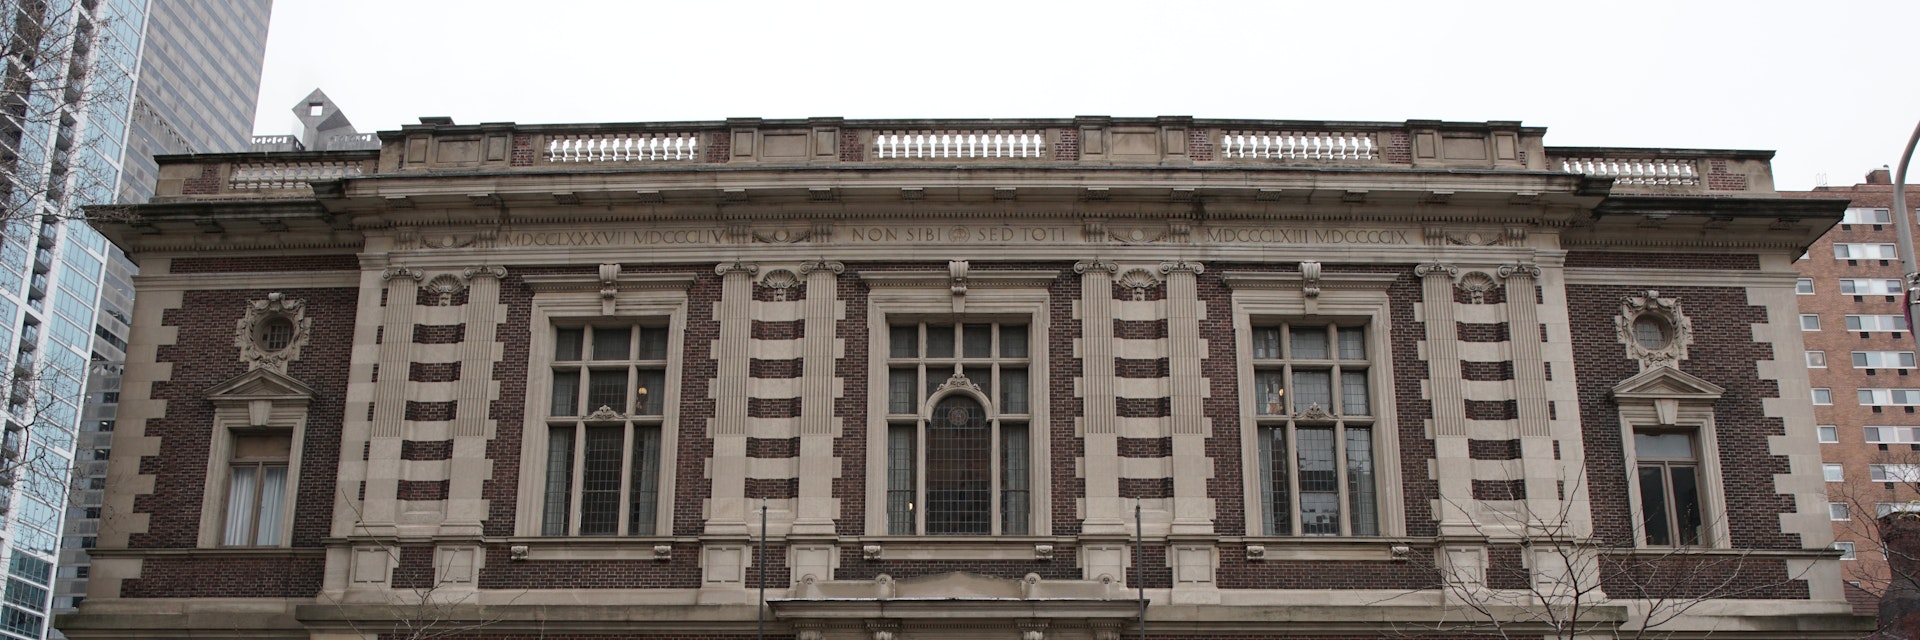 Exterior of the Mütter Museum at The College of Physicians of Philadelphia.